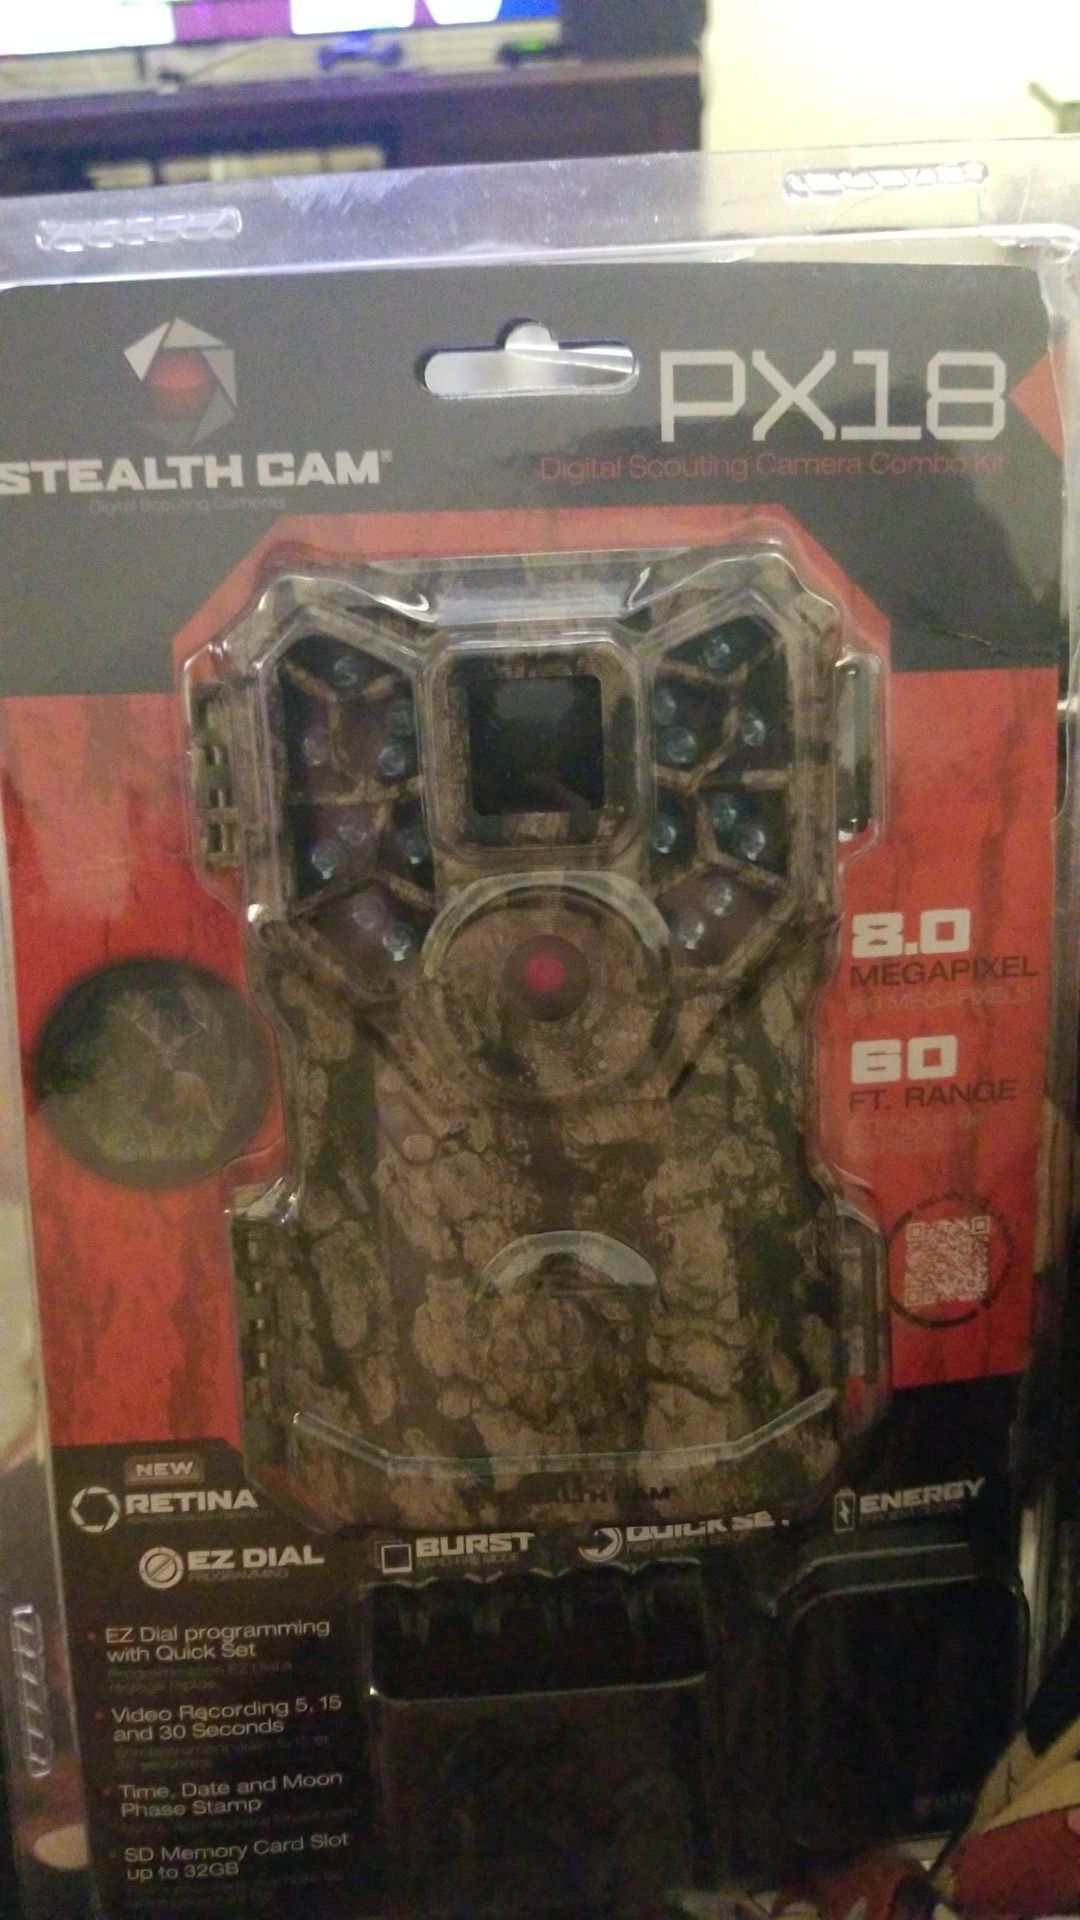 Stealth Cam px18